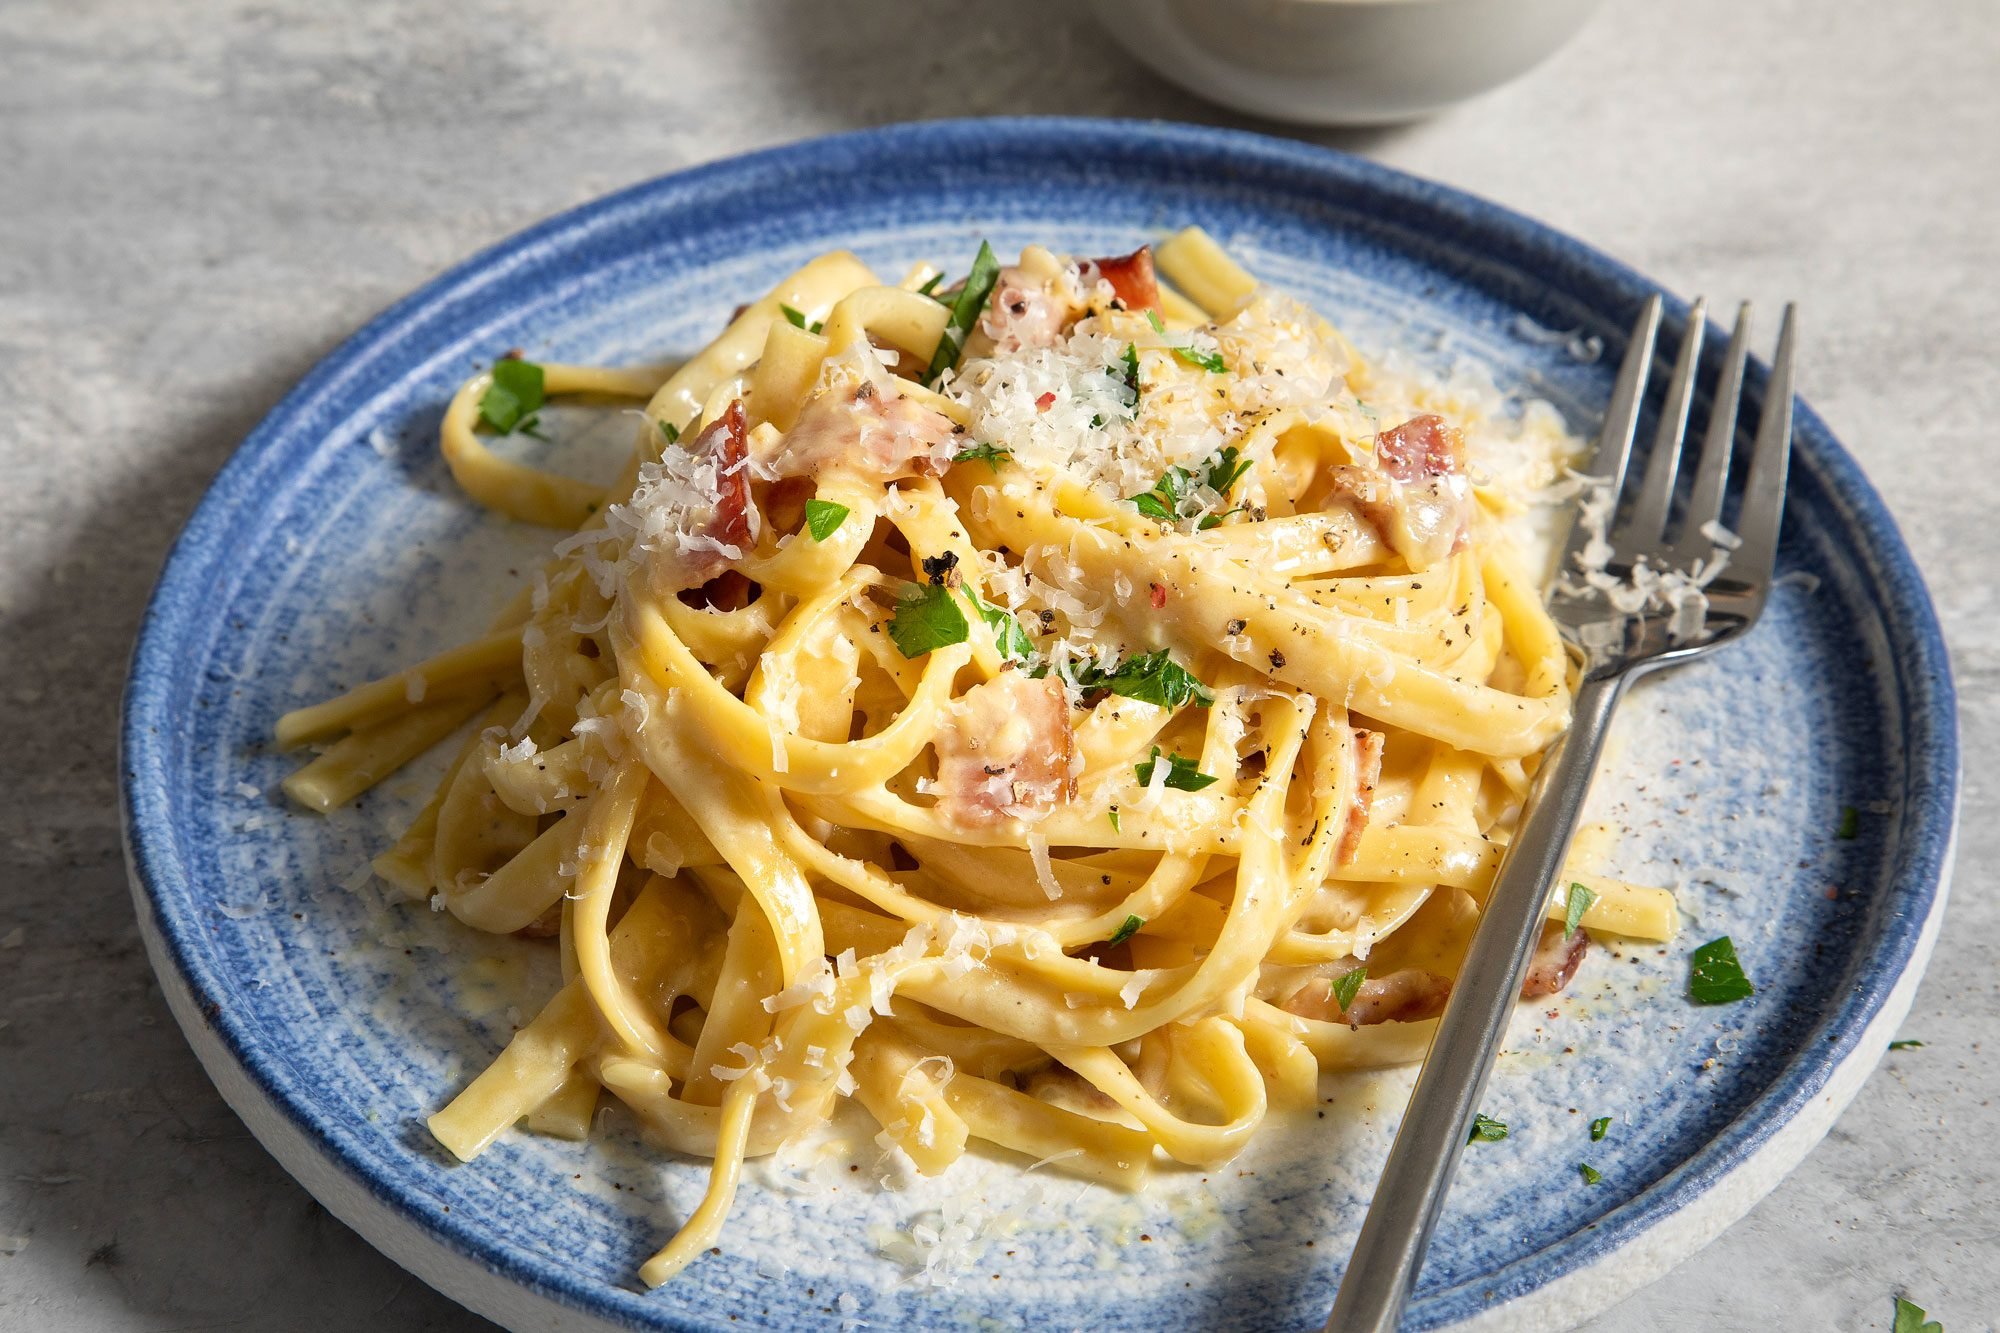 Fettuccine Carbonara with bacon, eggs, and Romano cheese served a dish with fork